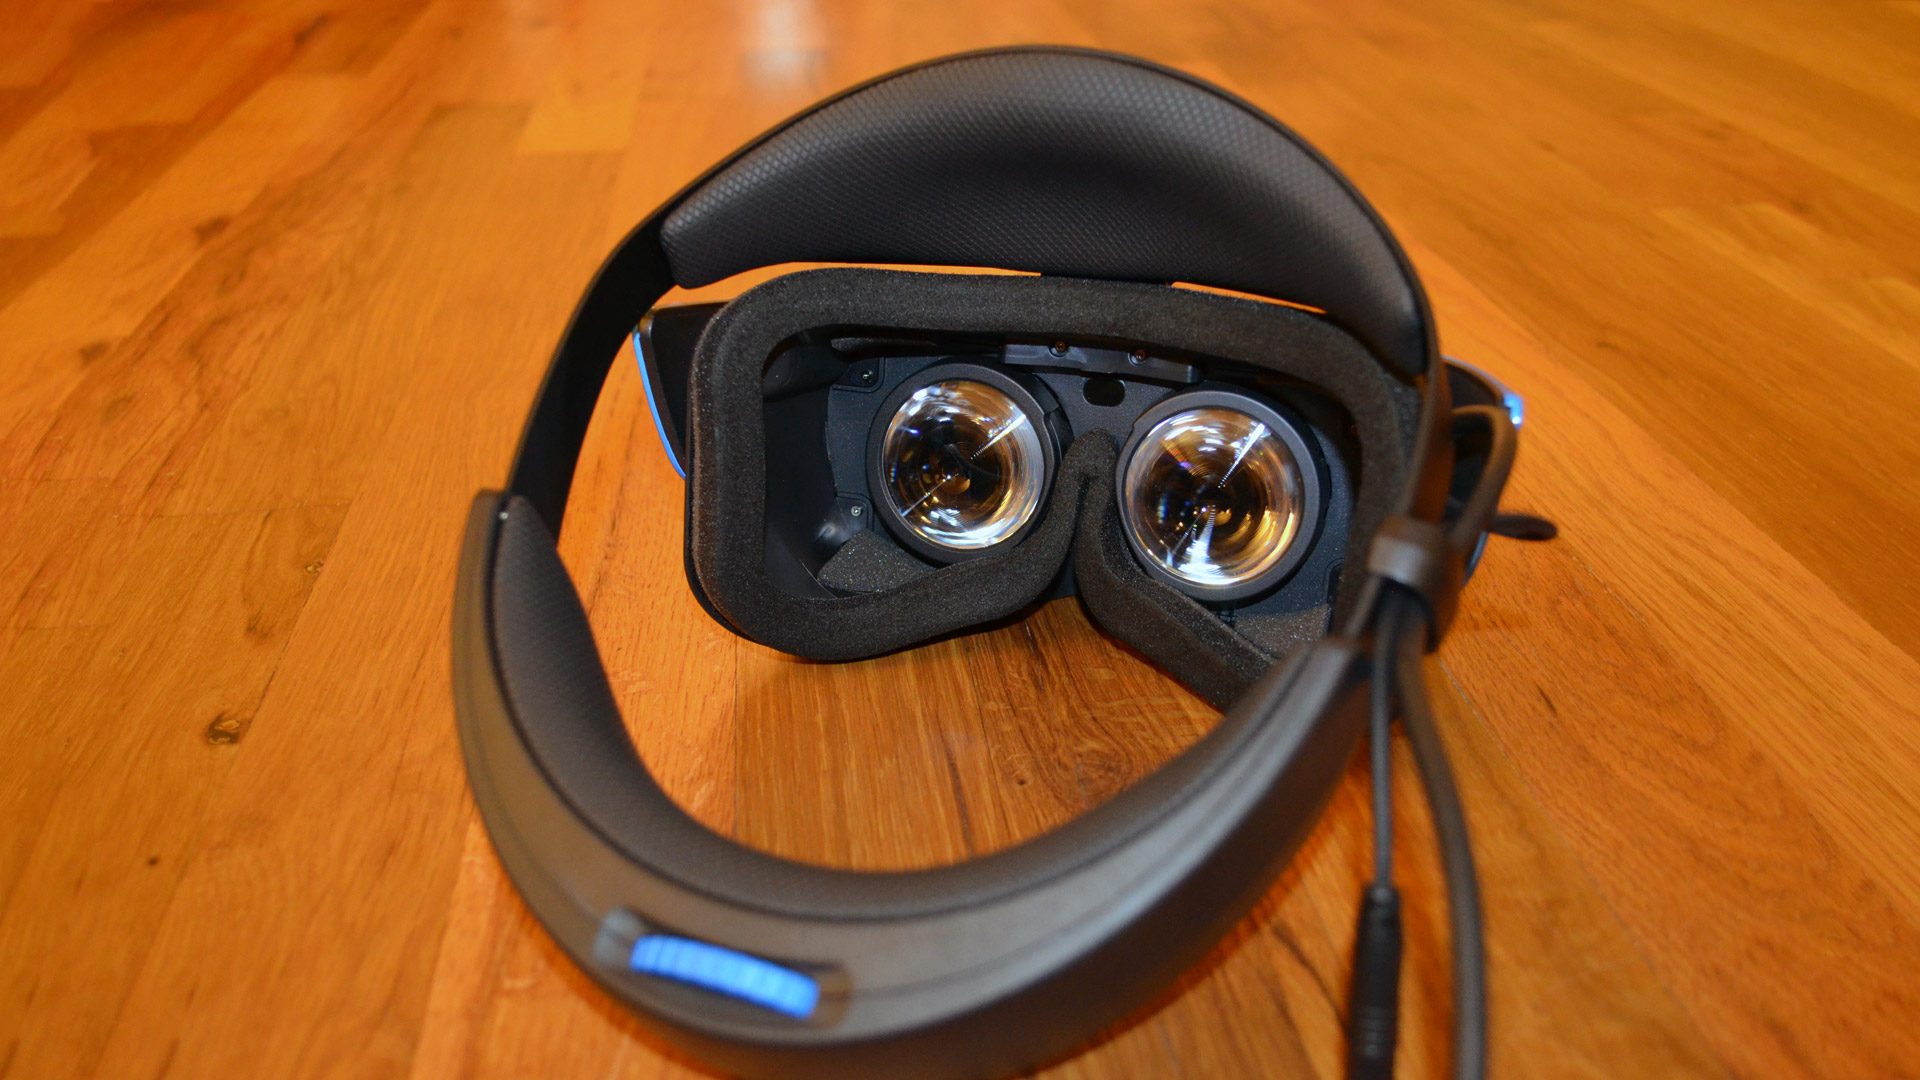 Acer Windows Mixed Reality VR Headset Review